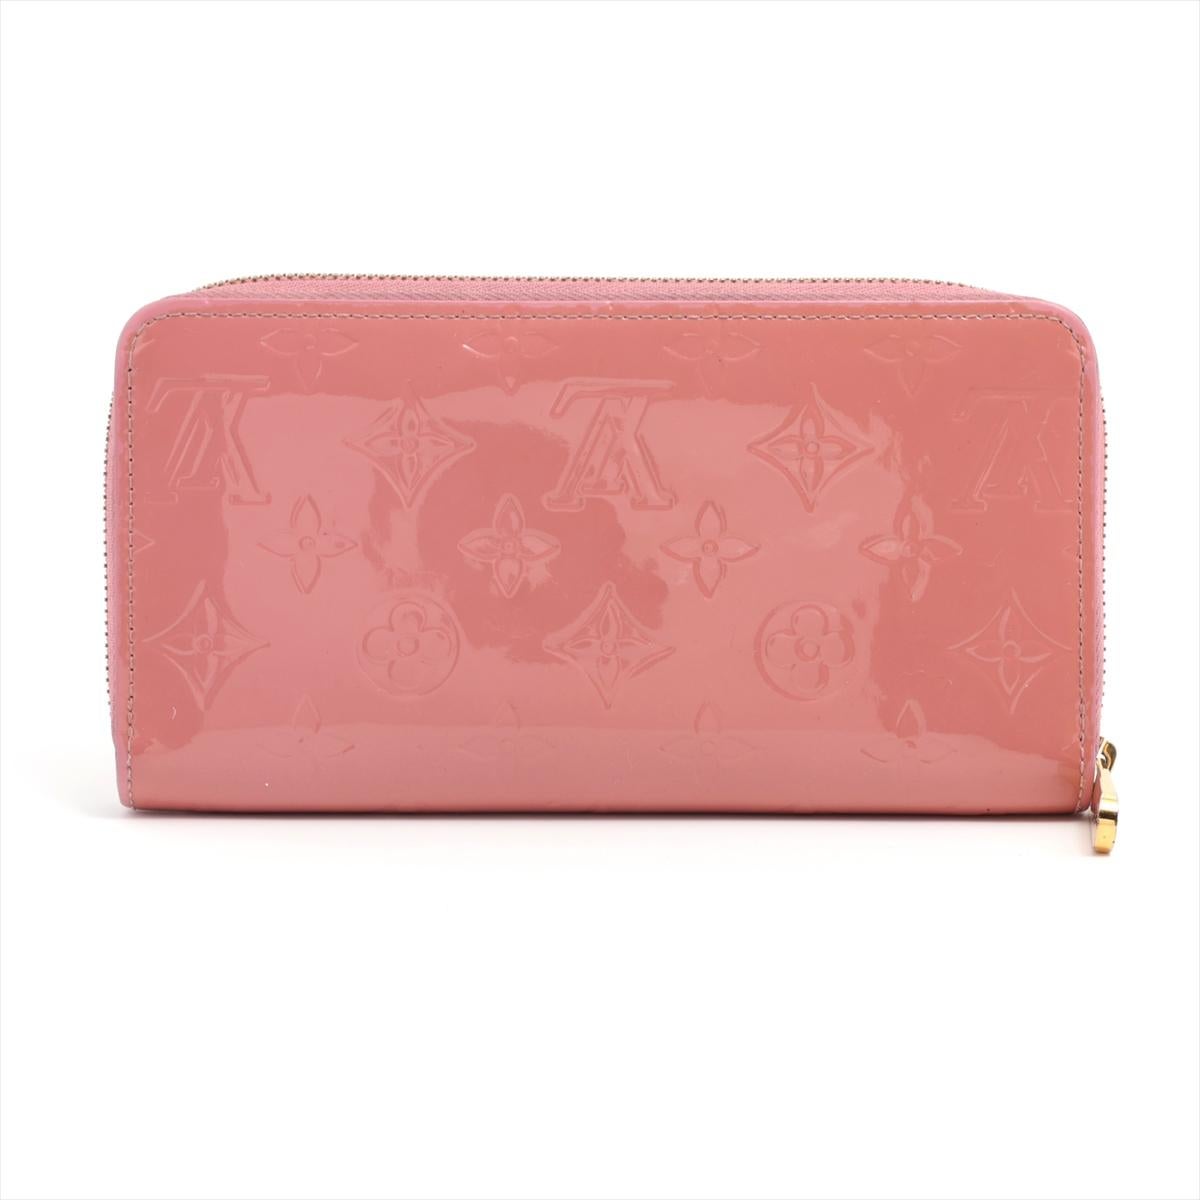 Louis Vuitton Vernis Zippy Long Wallet Rose Ballerine In Good Condition For Sale In Indianapolis, IN